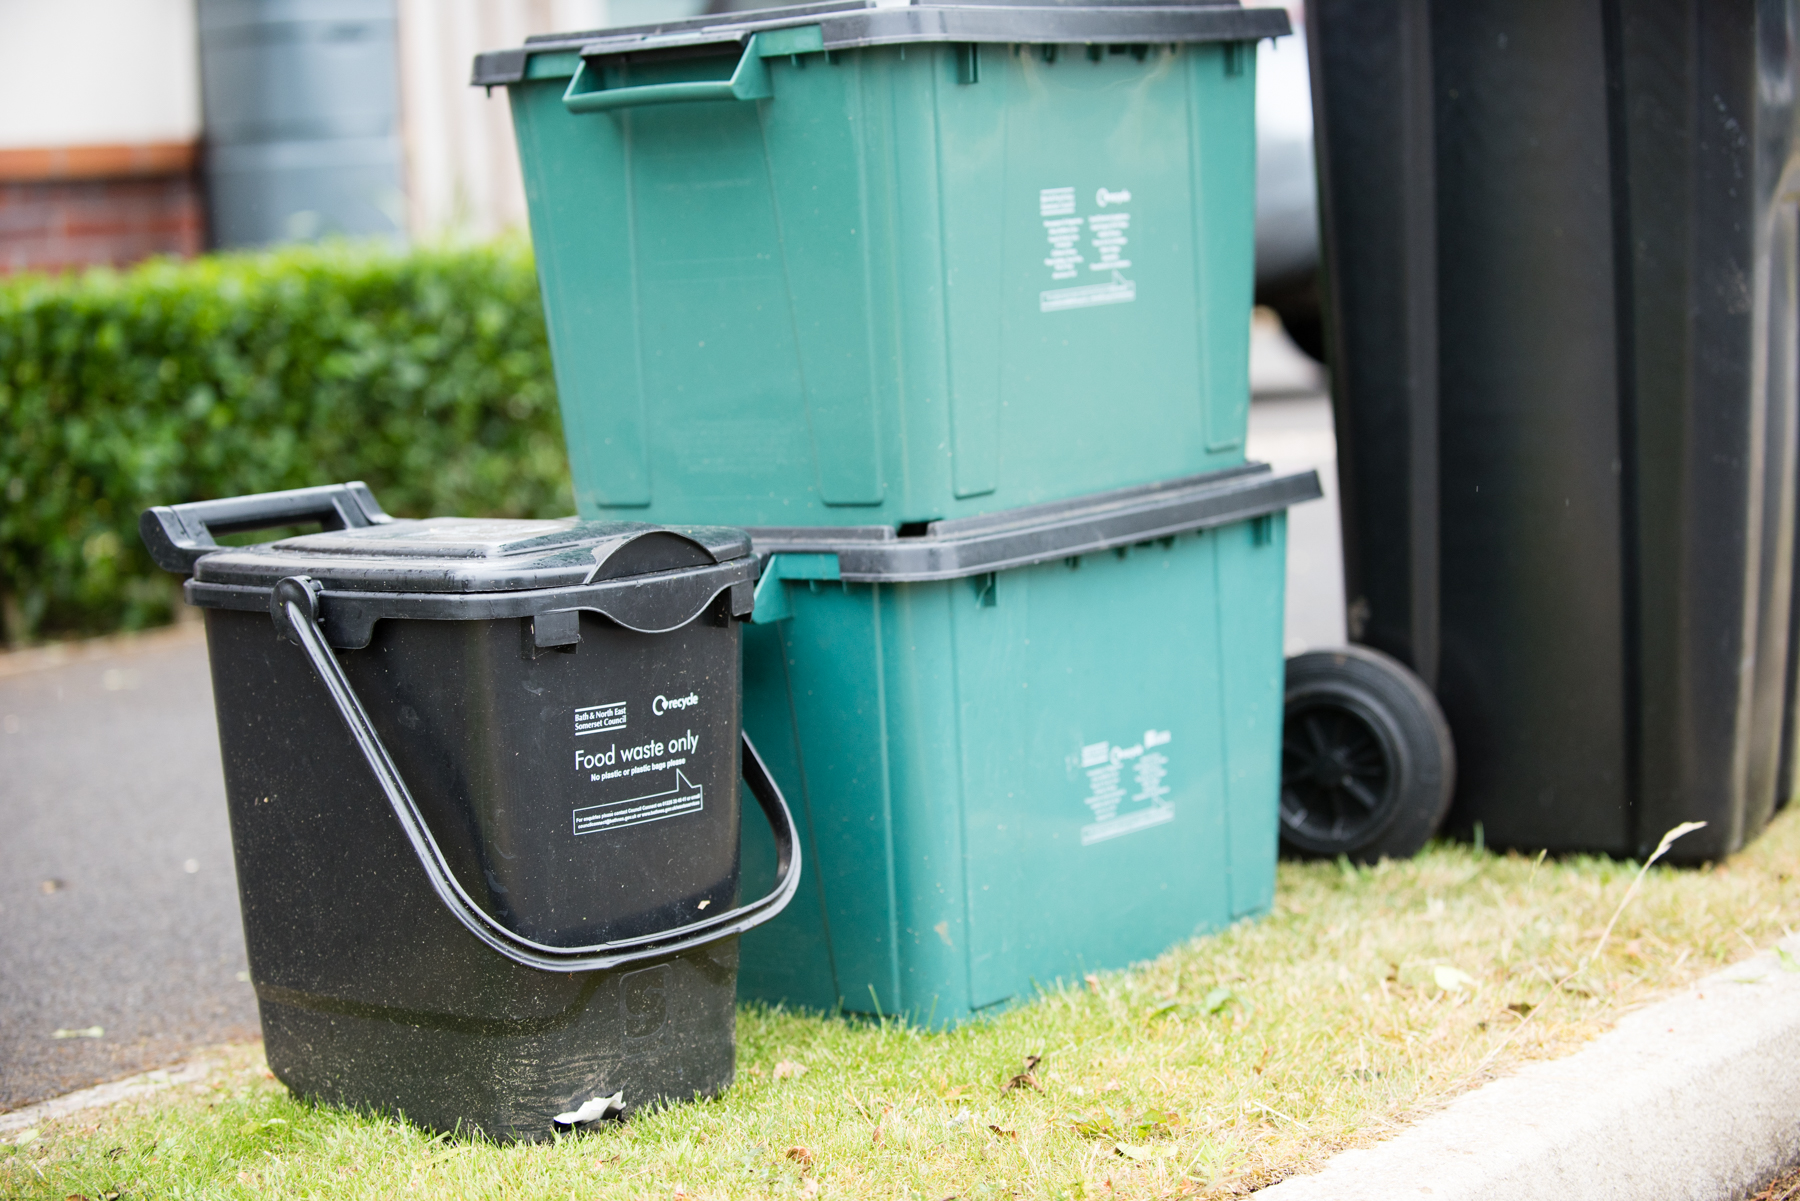 a photo of a black food waste recyling bin alongside two green recycling boxes and a black waste bin. All on a kerbside